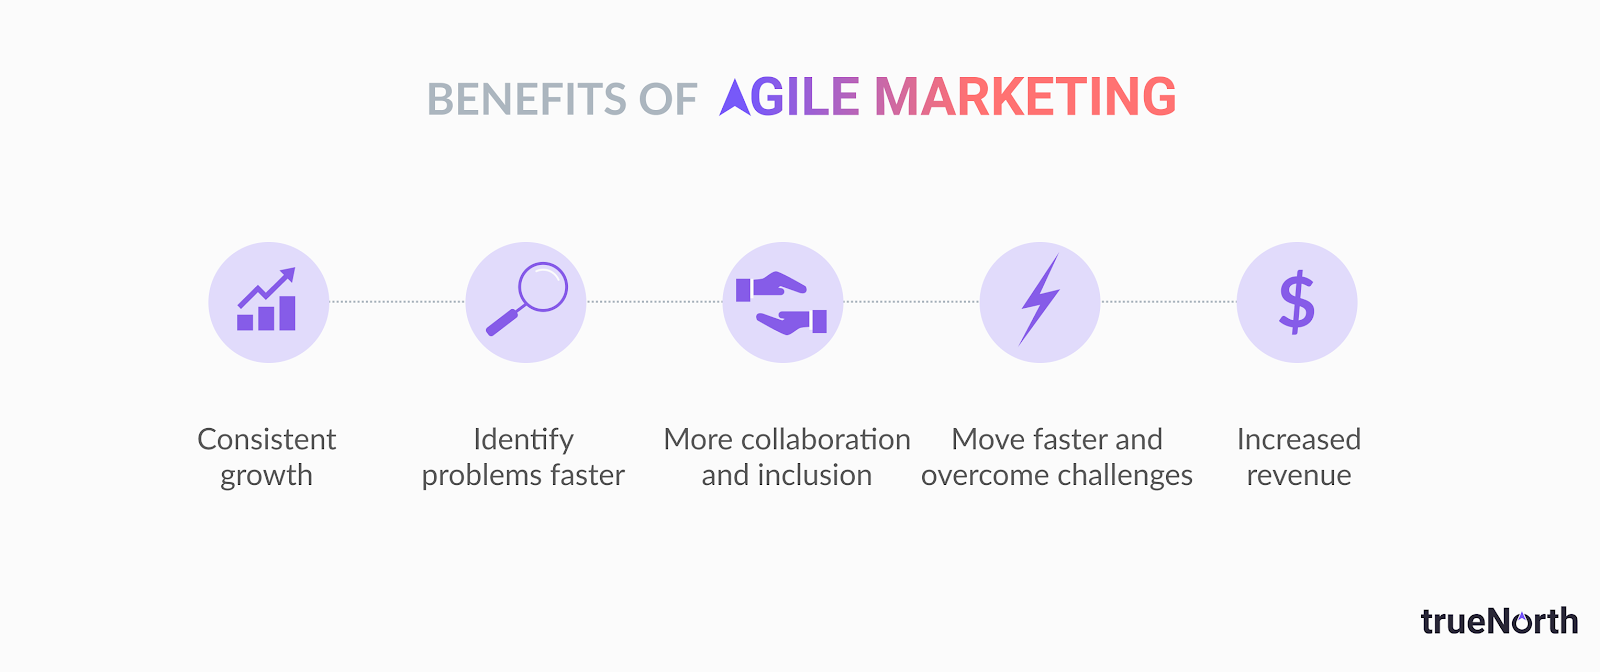 How Agile Marketing Will Benefit Your Business